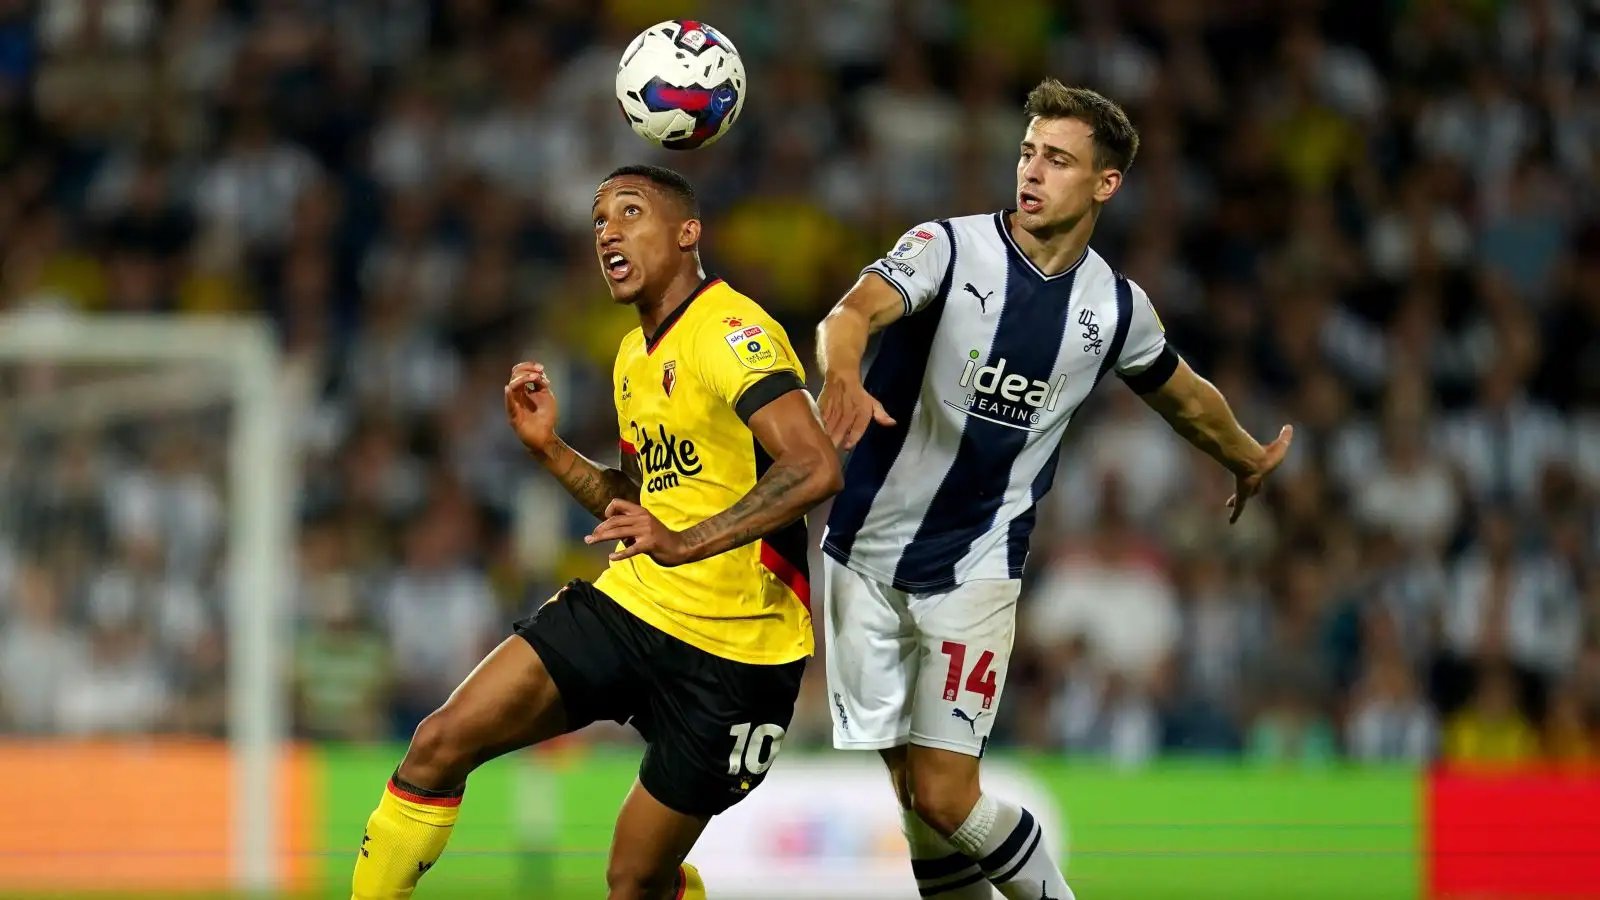 Newcastle target Joao Pedro heads the ball past a player